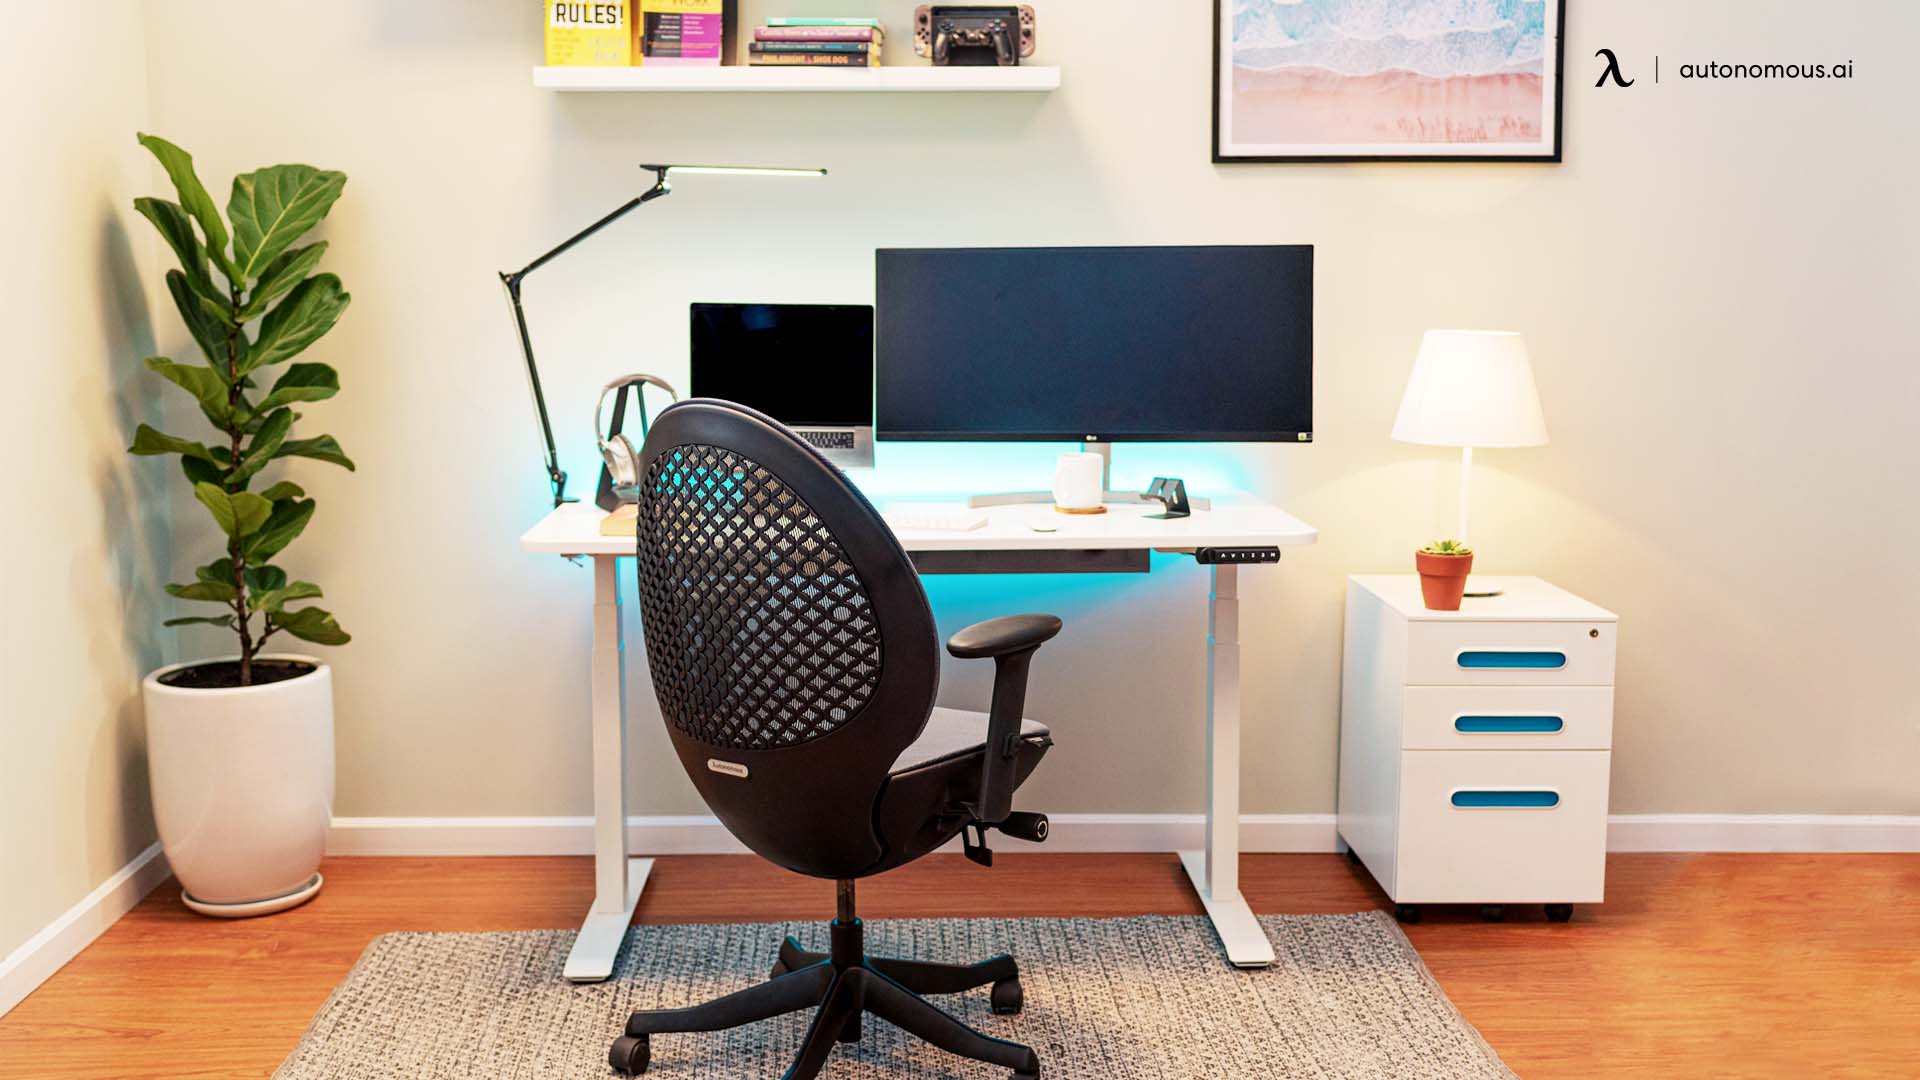 Deep Tans best colors for home office